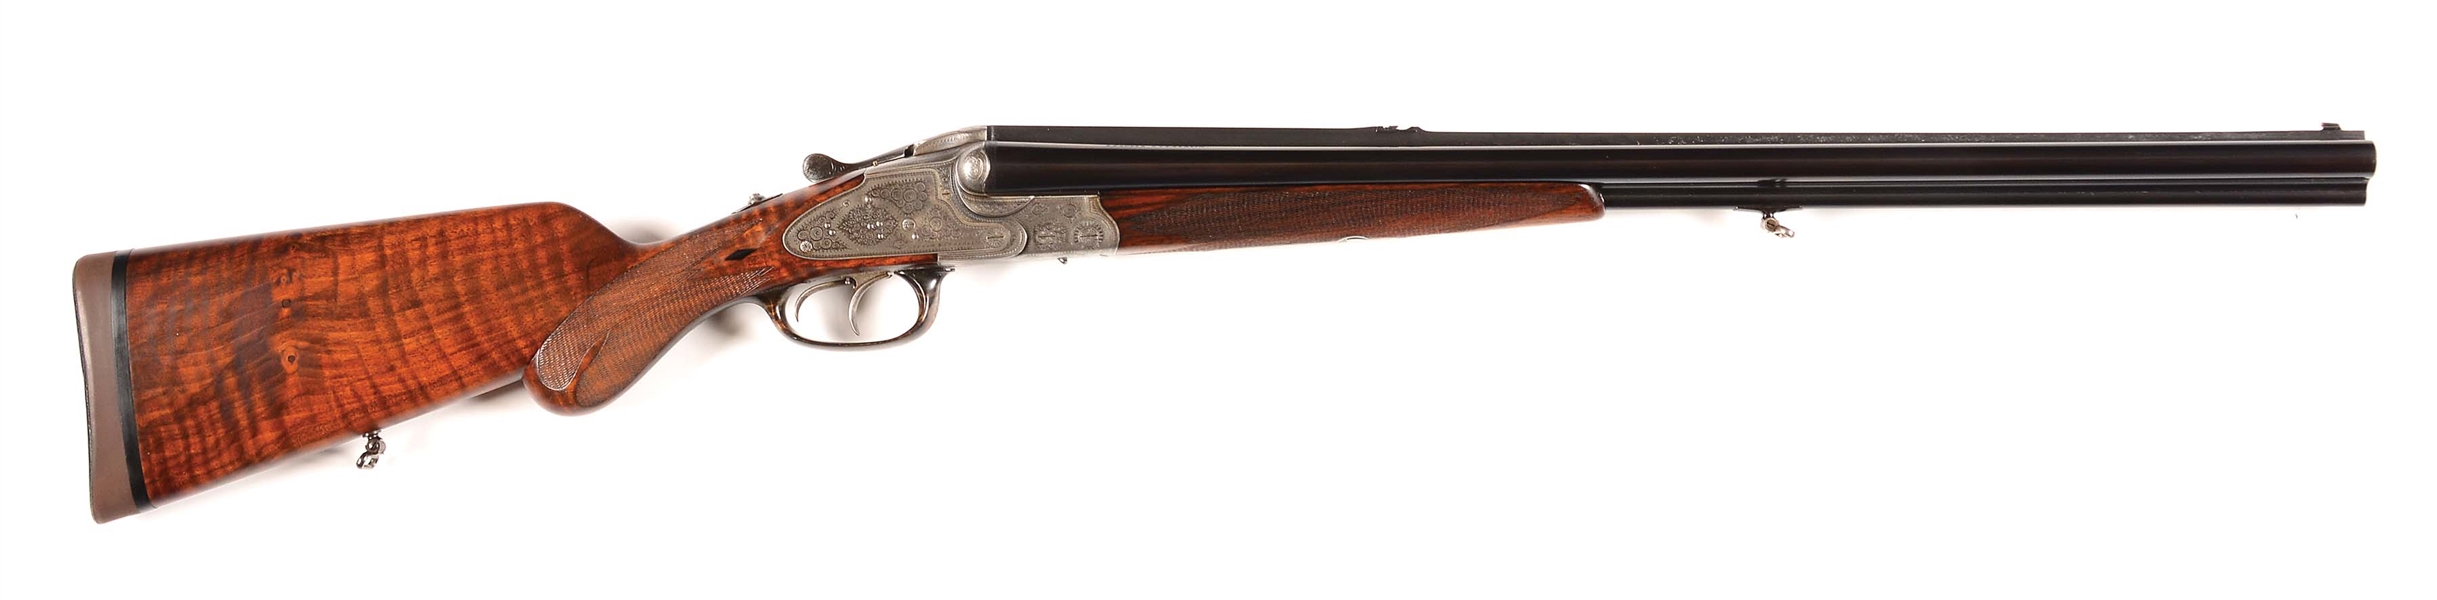 (C) RARE EXQUISITE 20 BORE O. GEYGER & CO. VIERLING COMBINATION RIFLE.